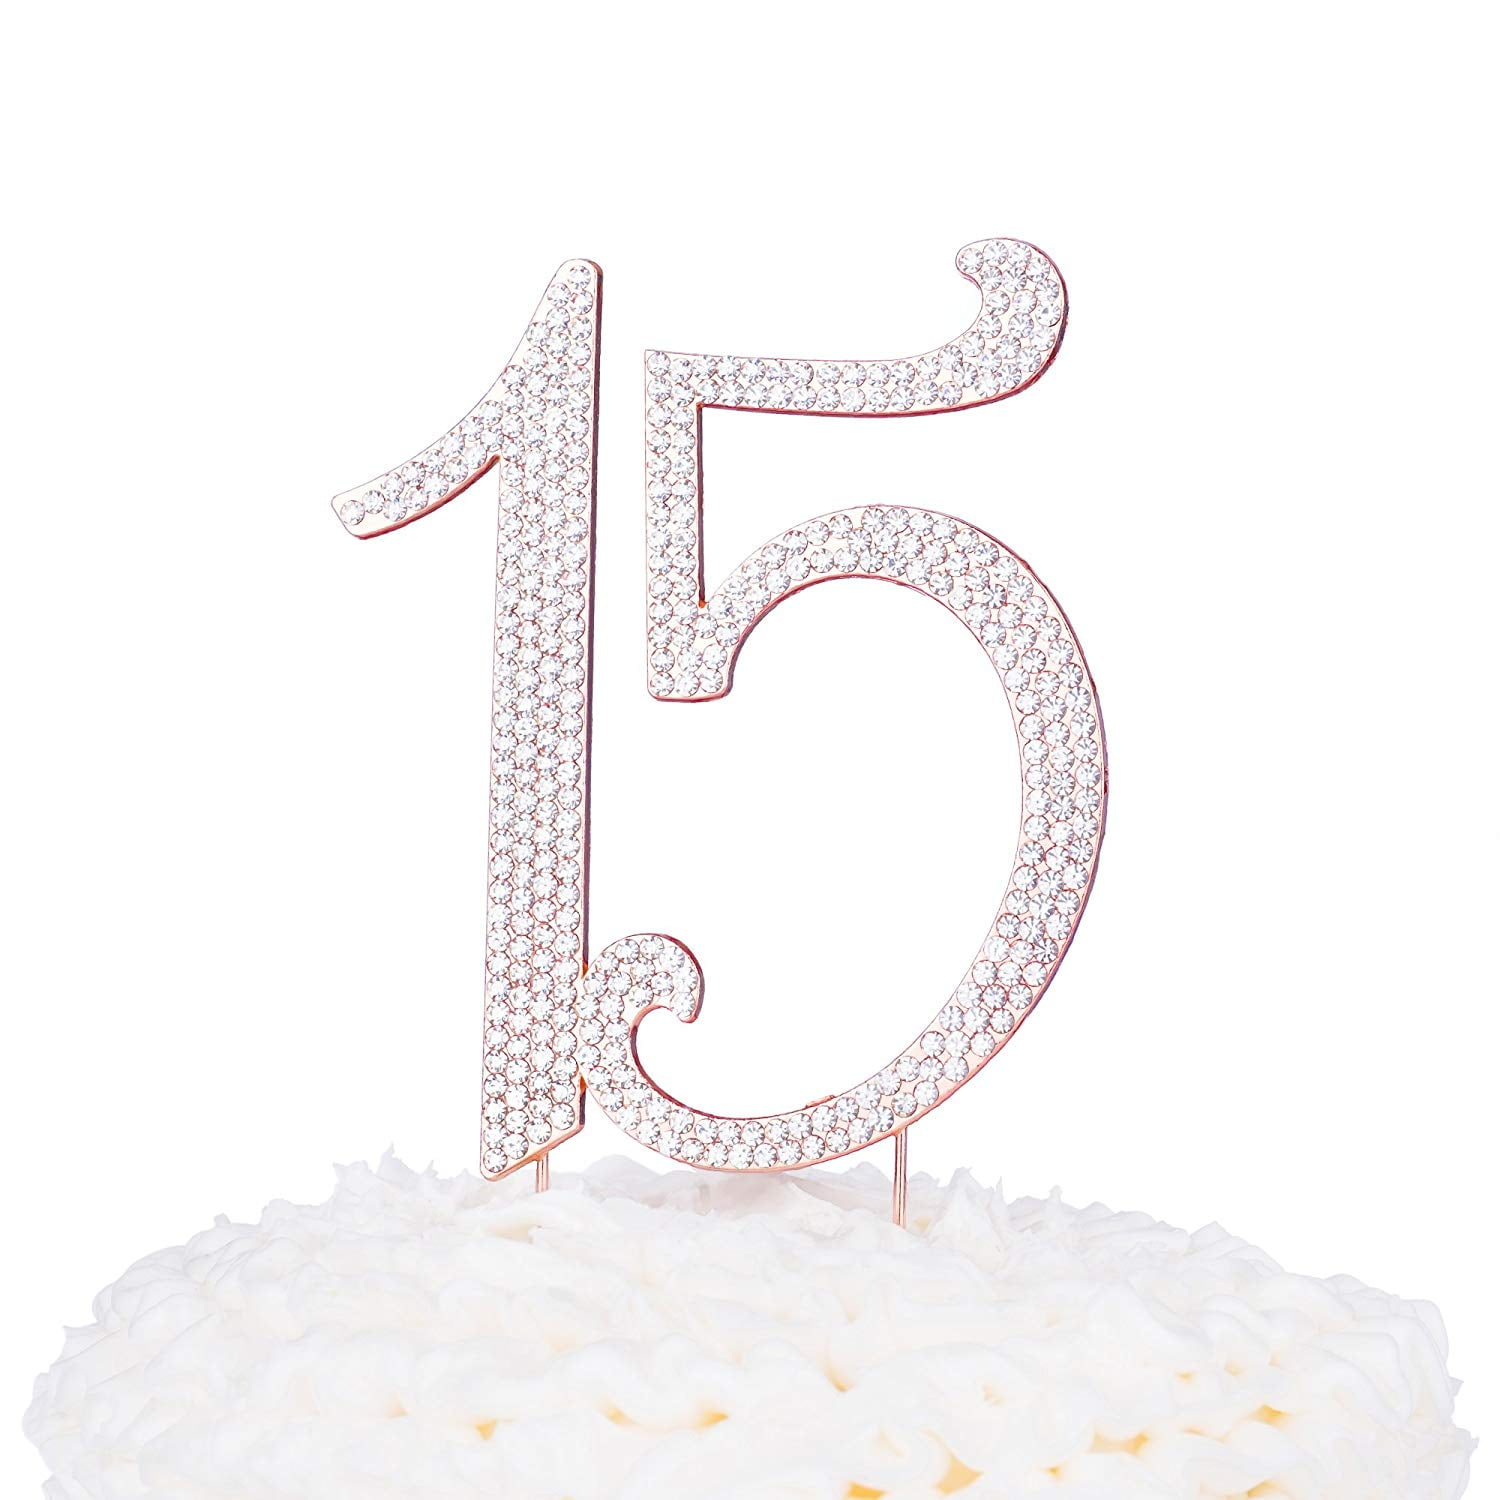 ZYOZI Rose Gold Glitter 15th Anniversary Cake Topper with Diamond Ring  Heart Cake Decorations Set for 15th Wedding Graduations, Retirement Company  Celebration Party - Pack of 5 Cake Topper Price in India -